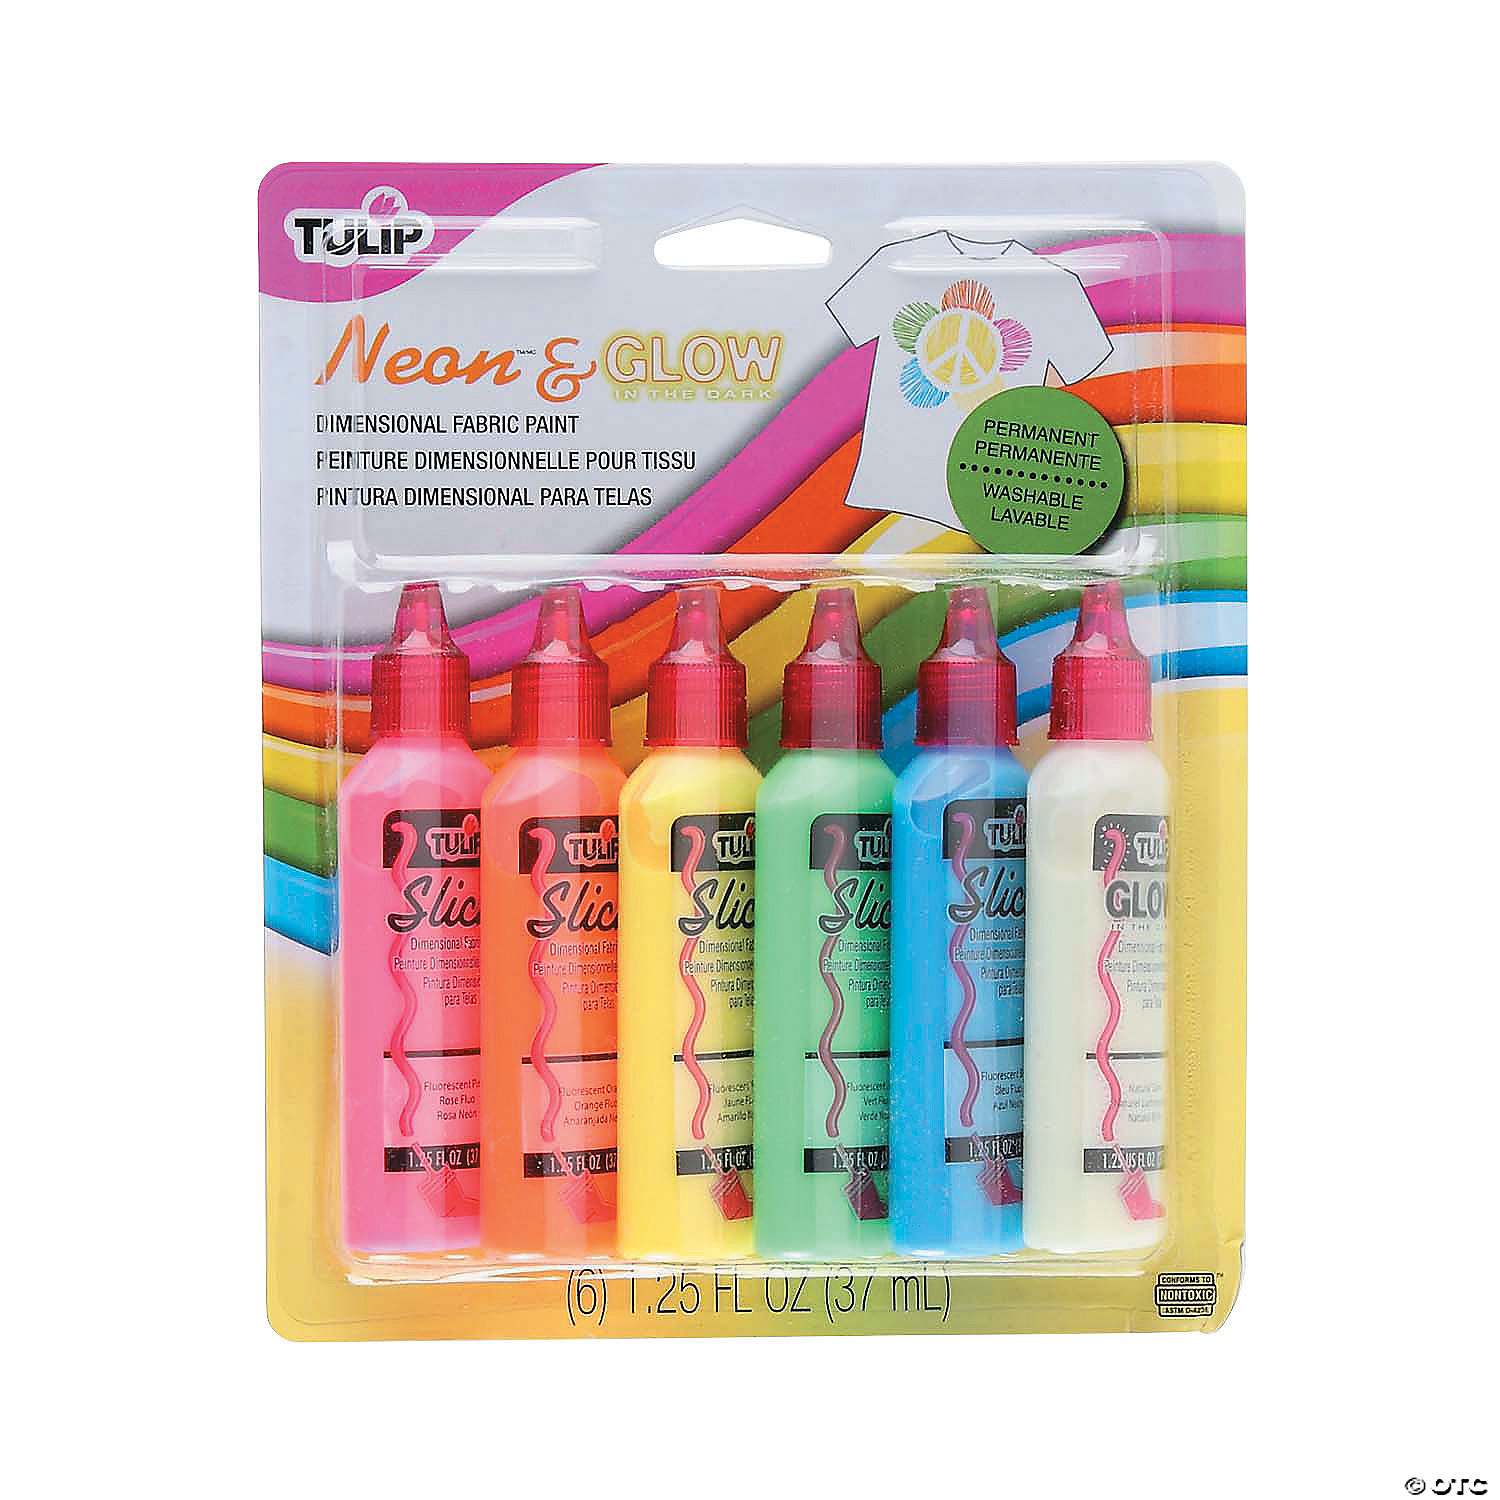 Tulip Neon Glow In The Dark Assorted Colors Dimensional Fabric Paint Set Of 6 Oriental Trading